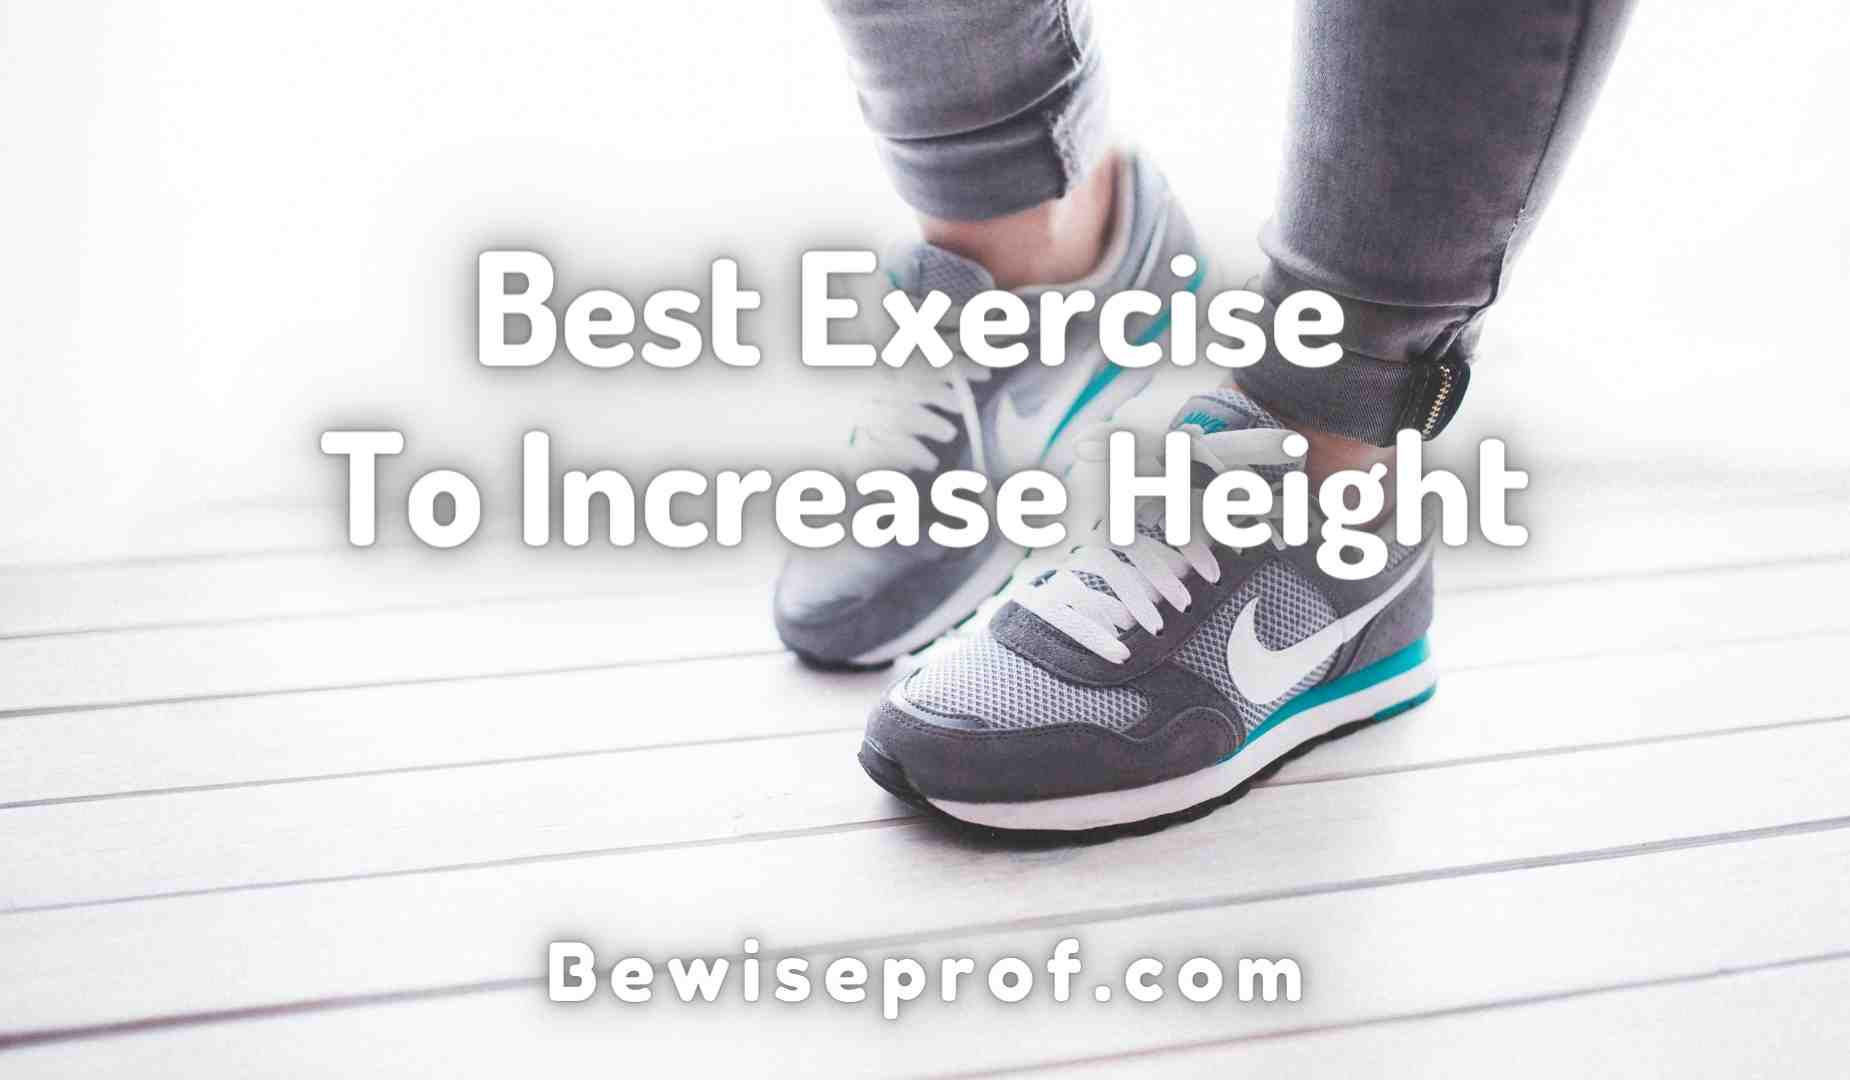 Best Exercise To Increase Height